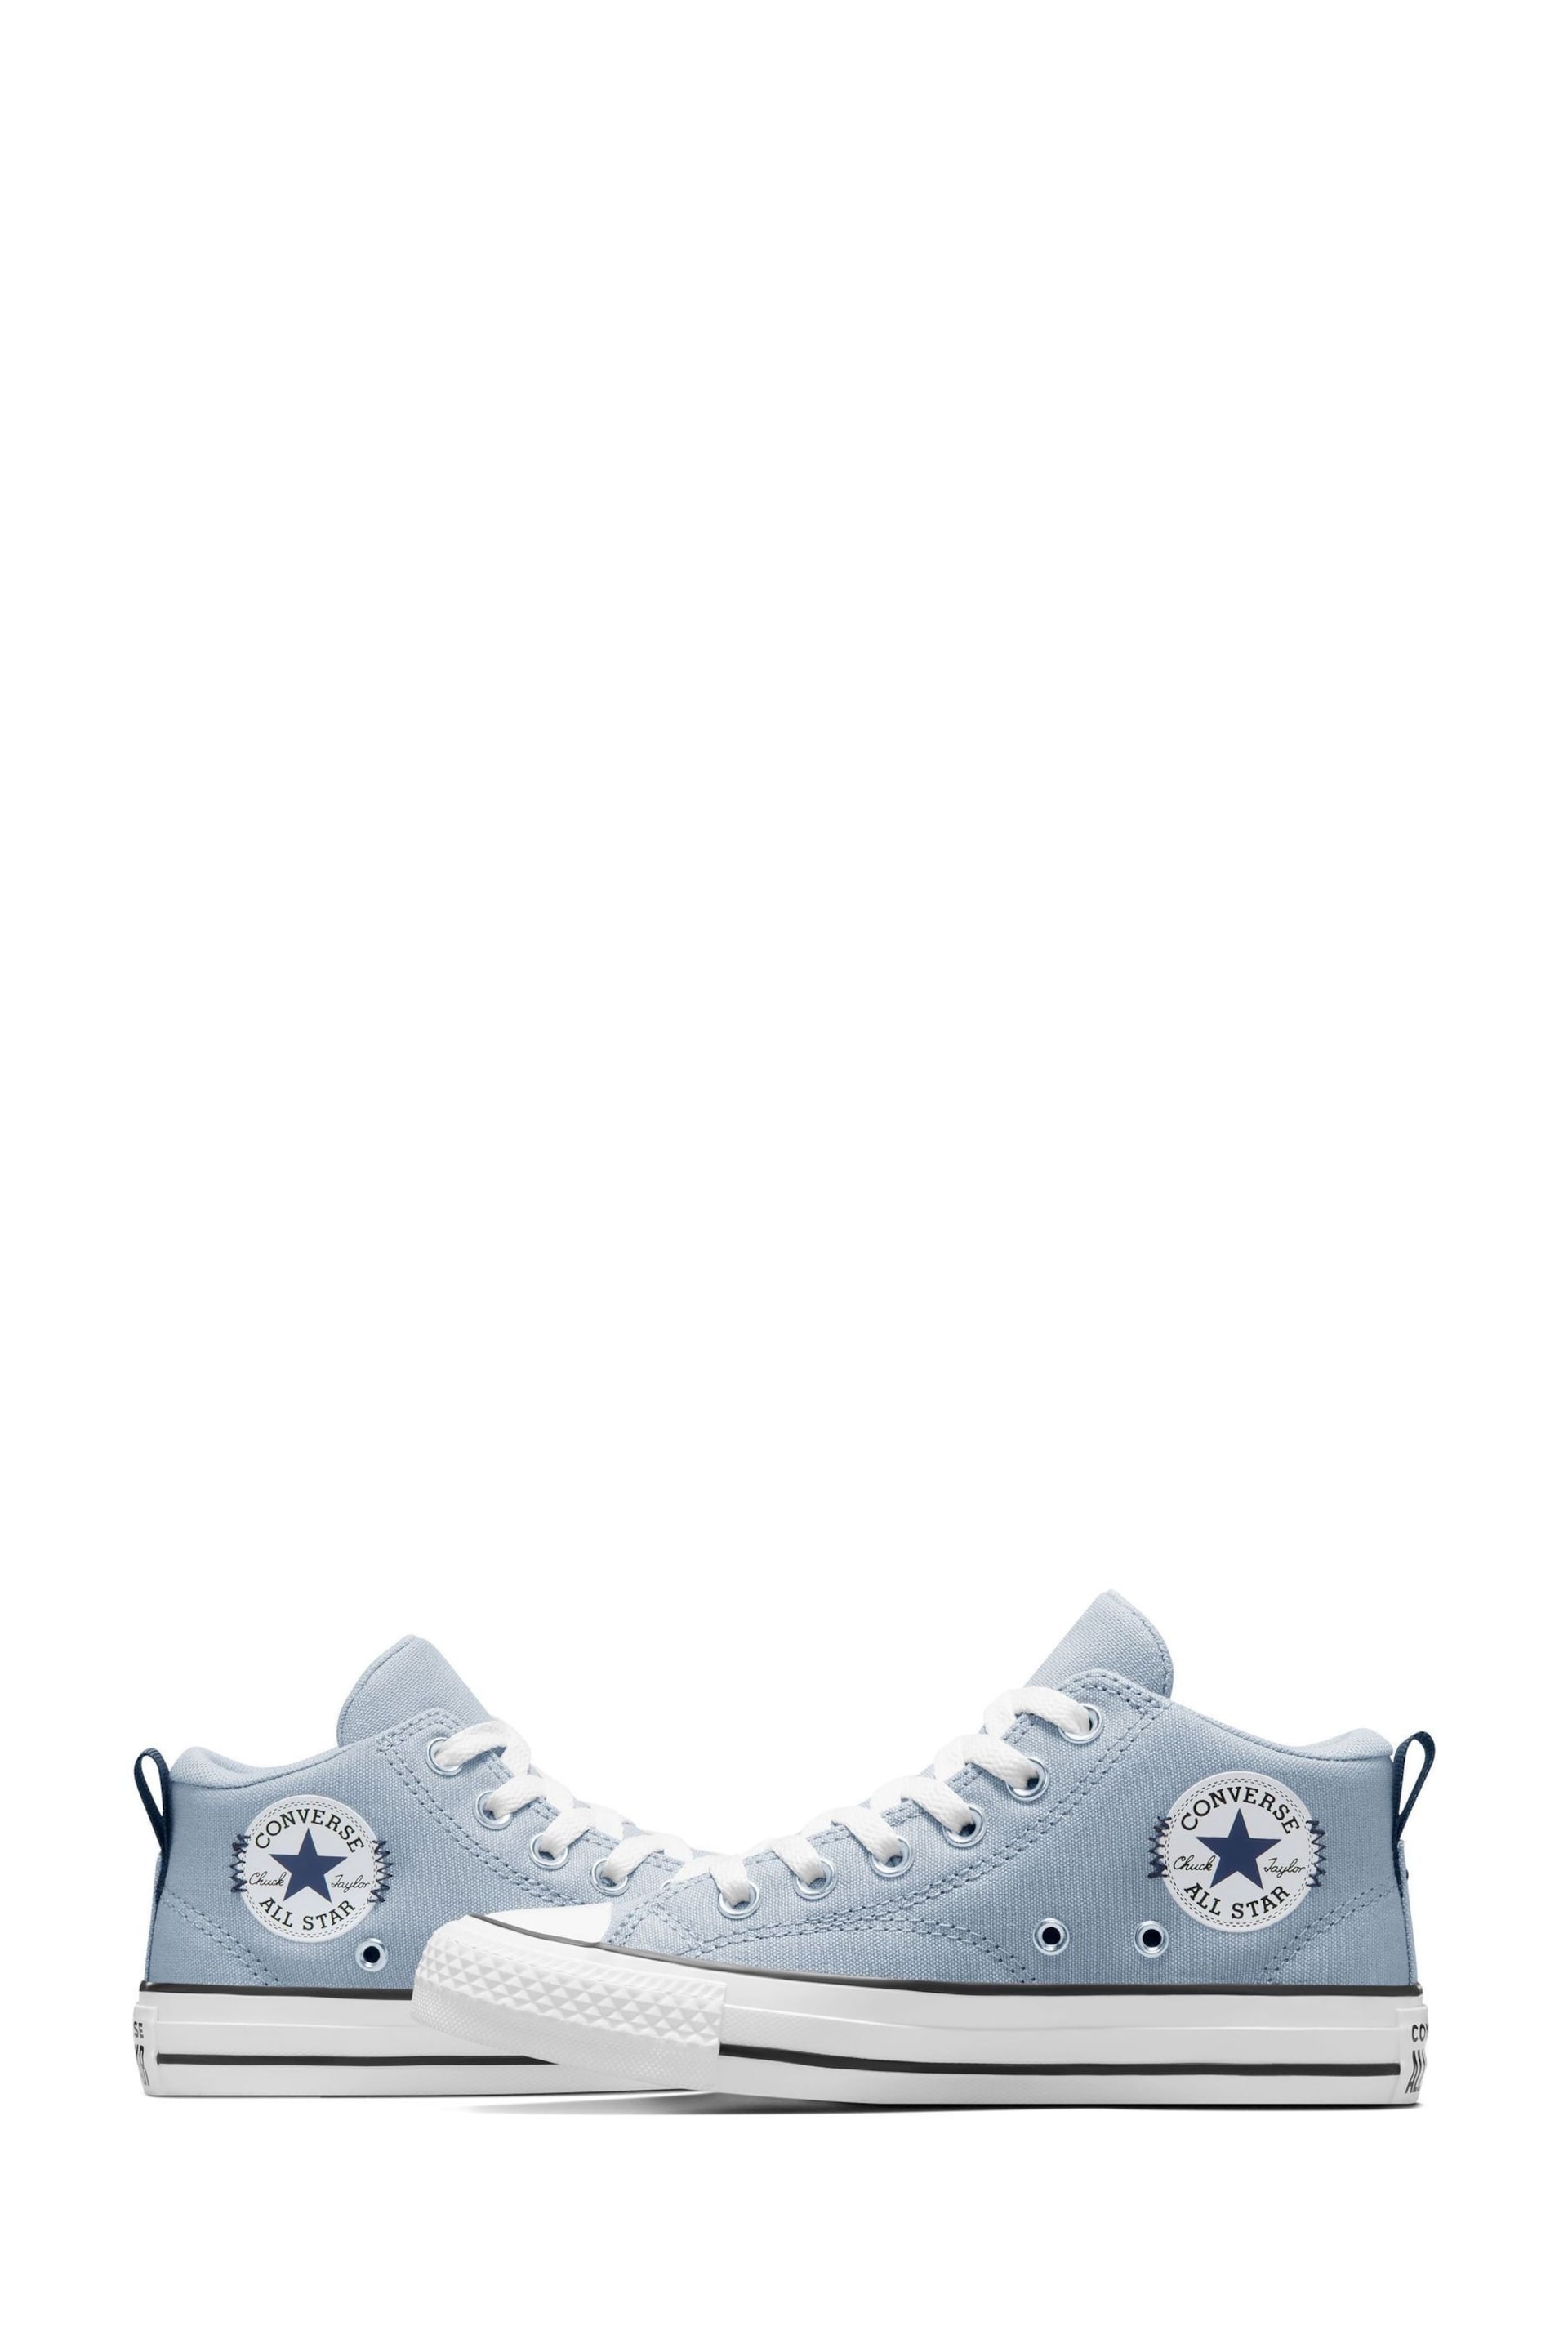 Converse Navy Malden Street Youth Trainers - Image 4 of 8